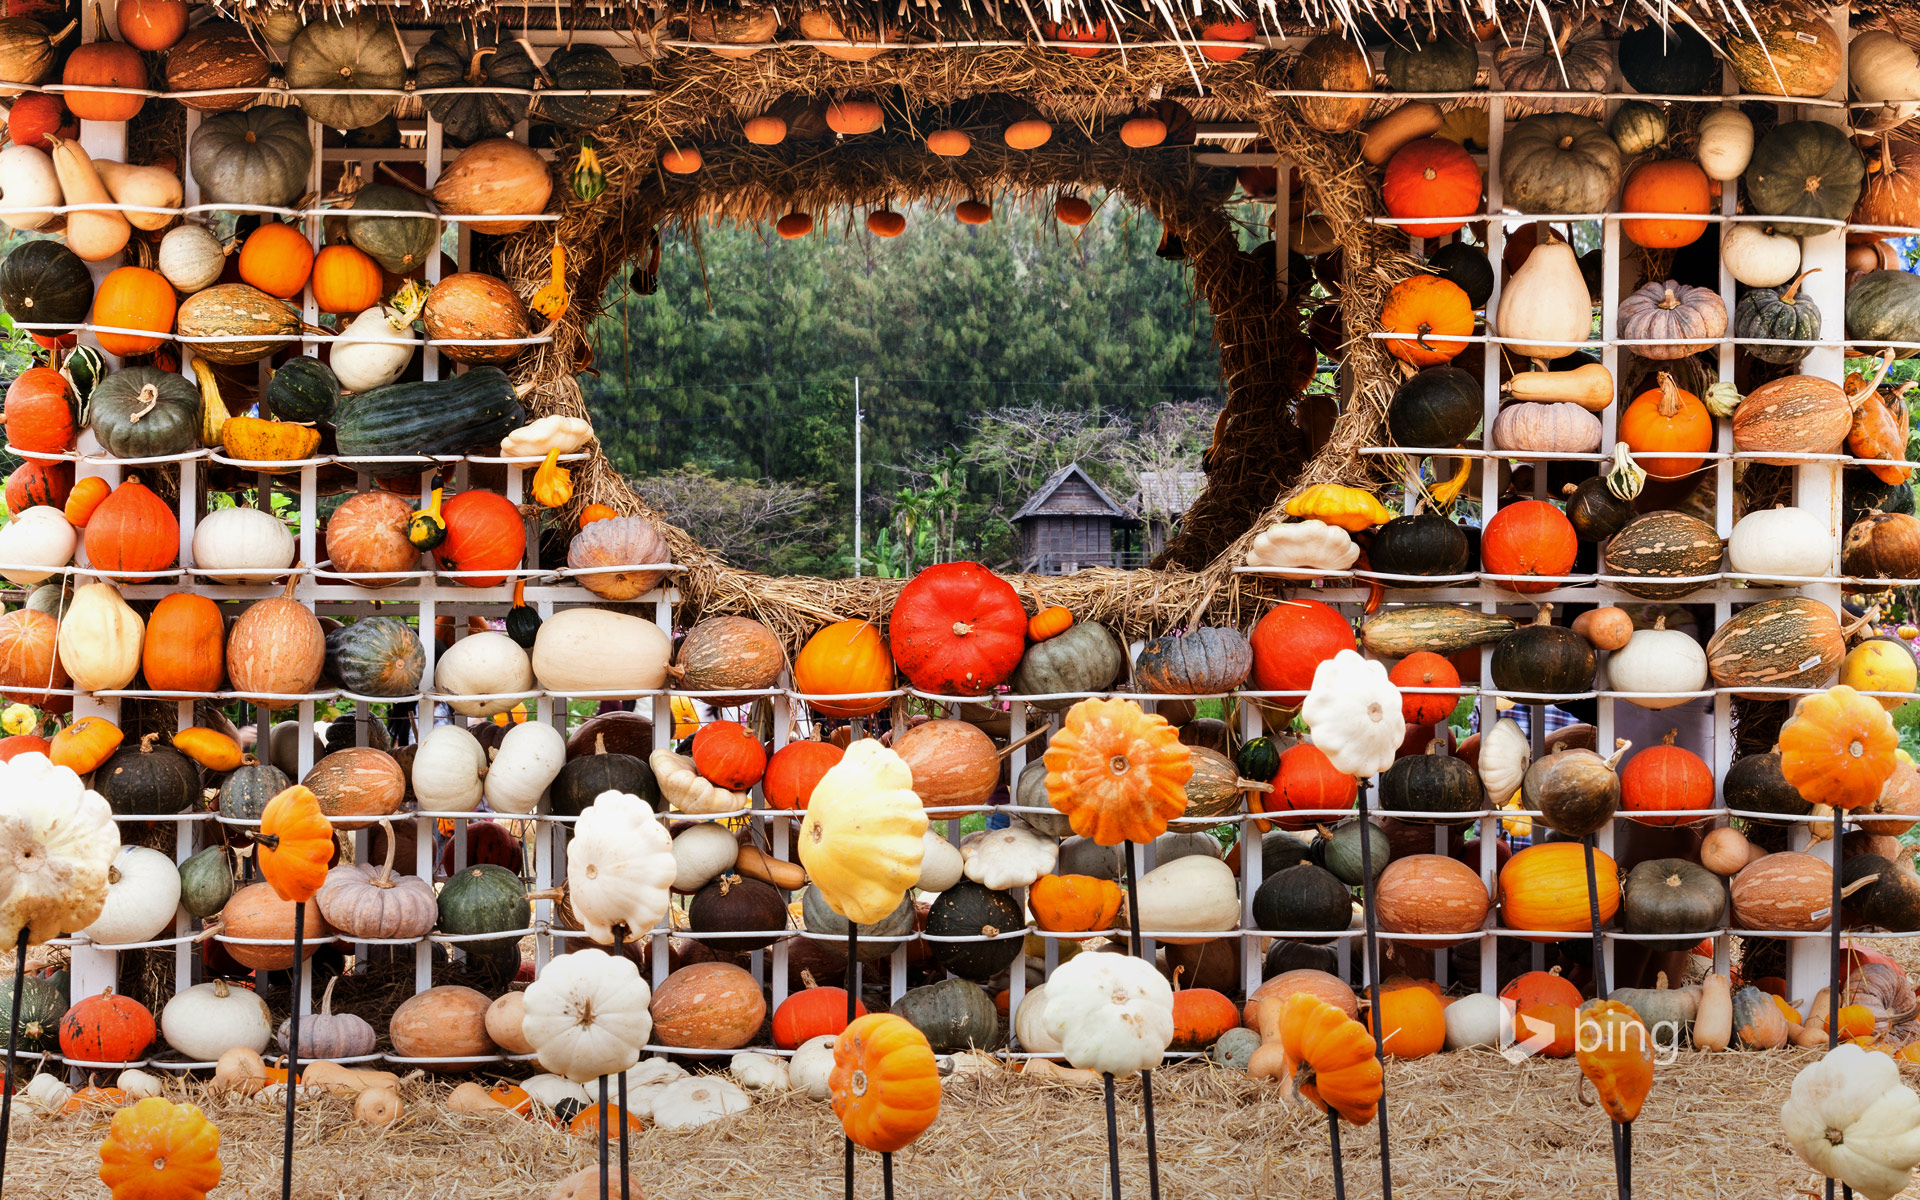 Colorful display of gourds, squash, and pumpkins in Nakhon Ratchasima, Thailand